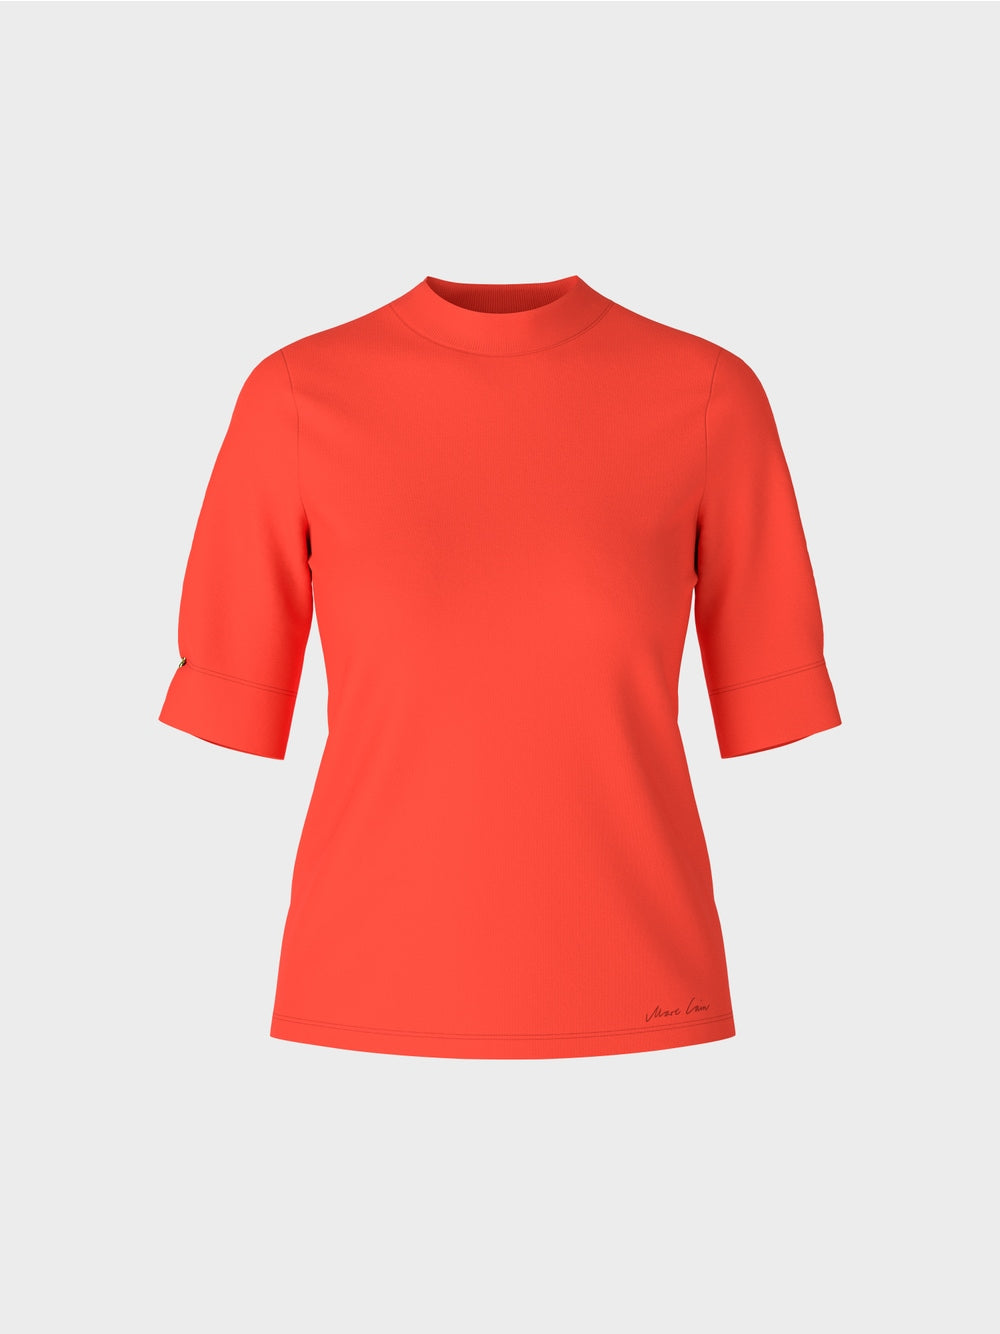 T-shirt with half-length sleeves